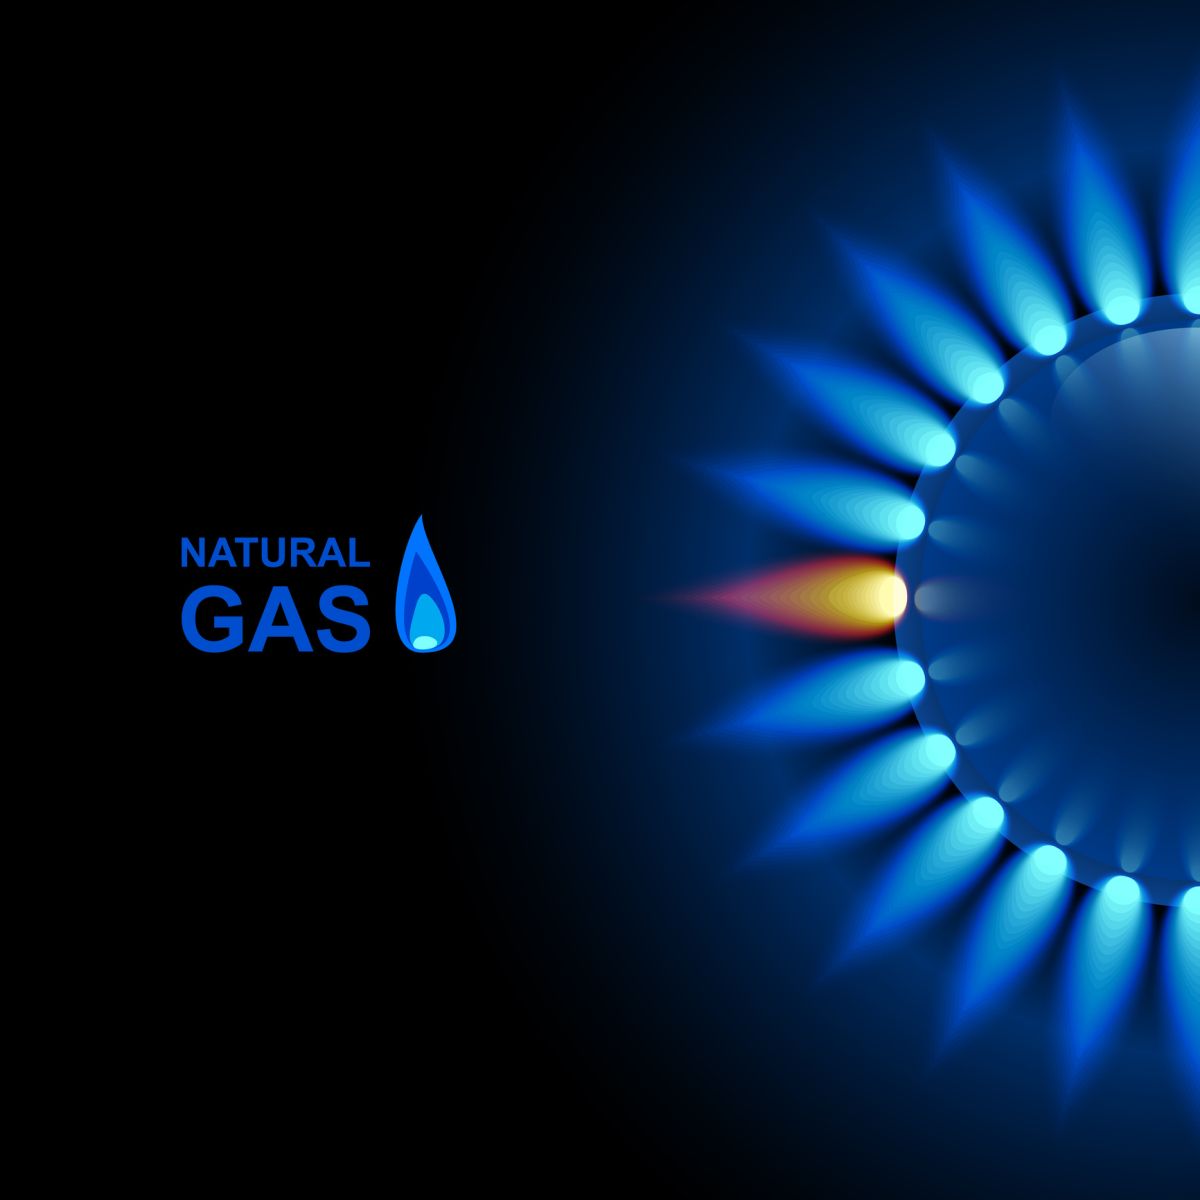 Oil - Gas flame with blue reflection on dark backdrop by Bellanatella via iStock